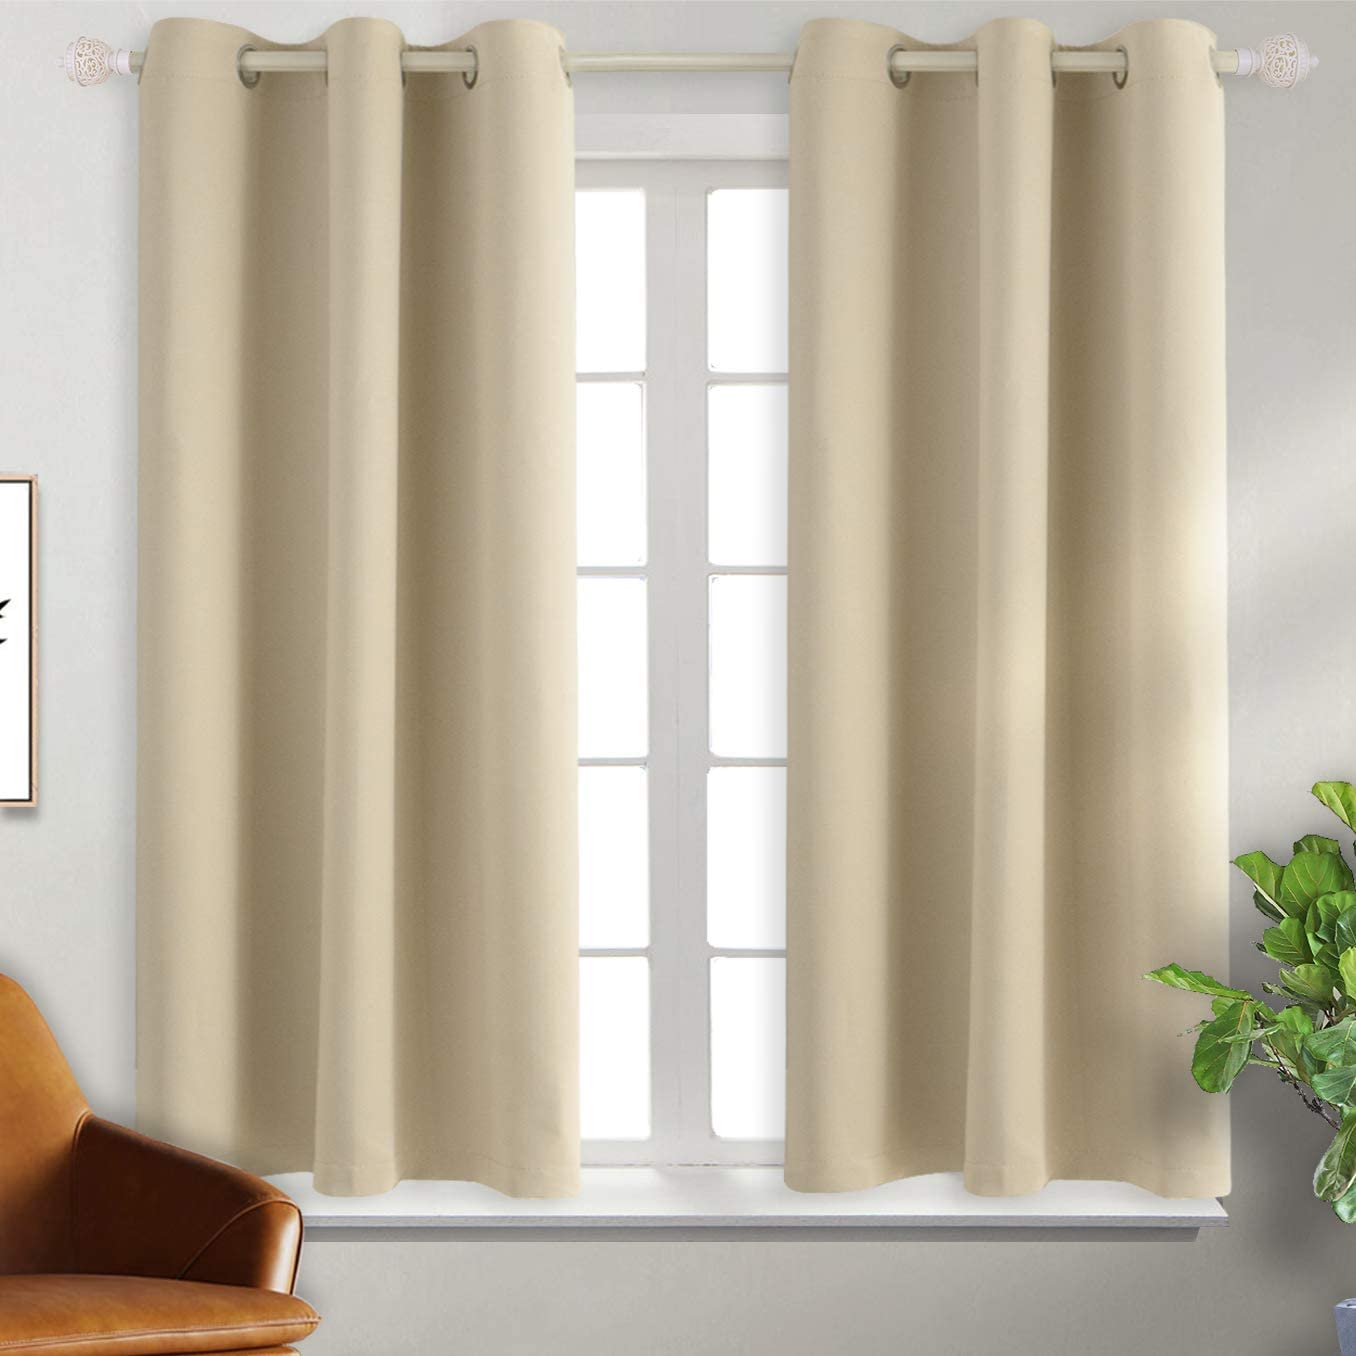 BGment Grommet Top Insulated Blackout Curtains